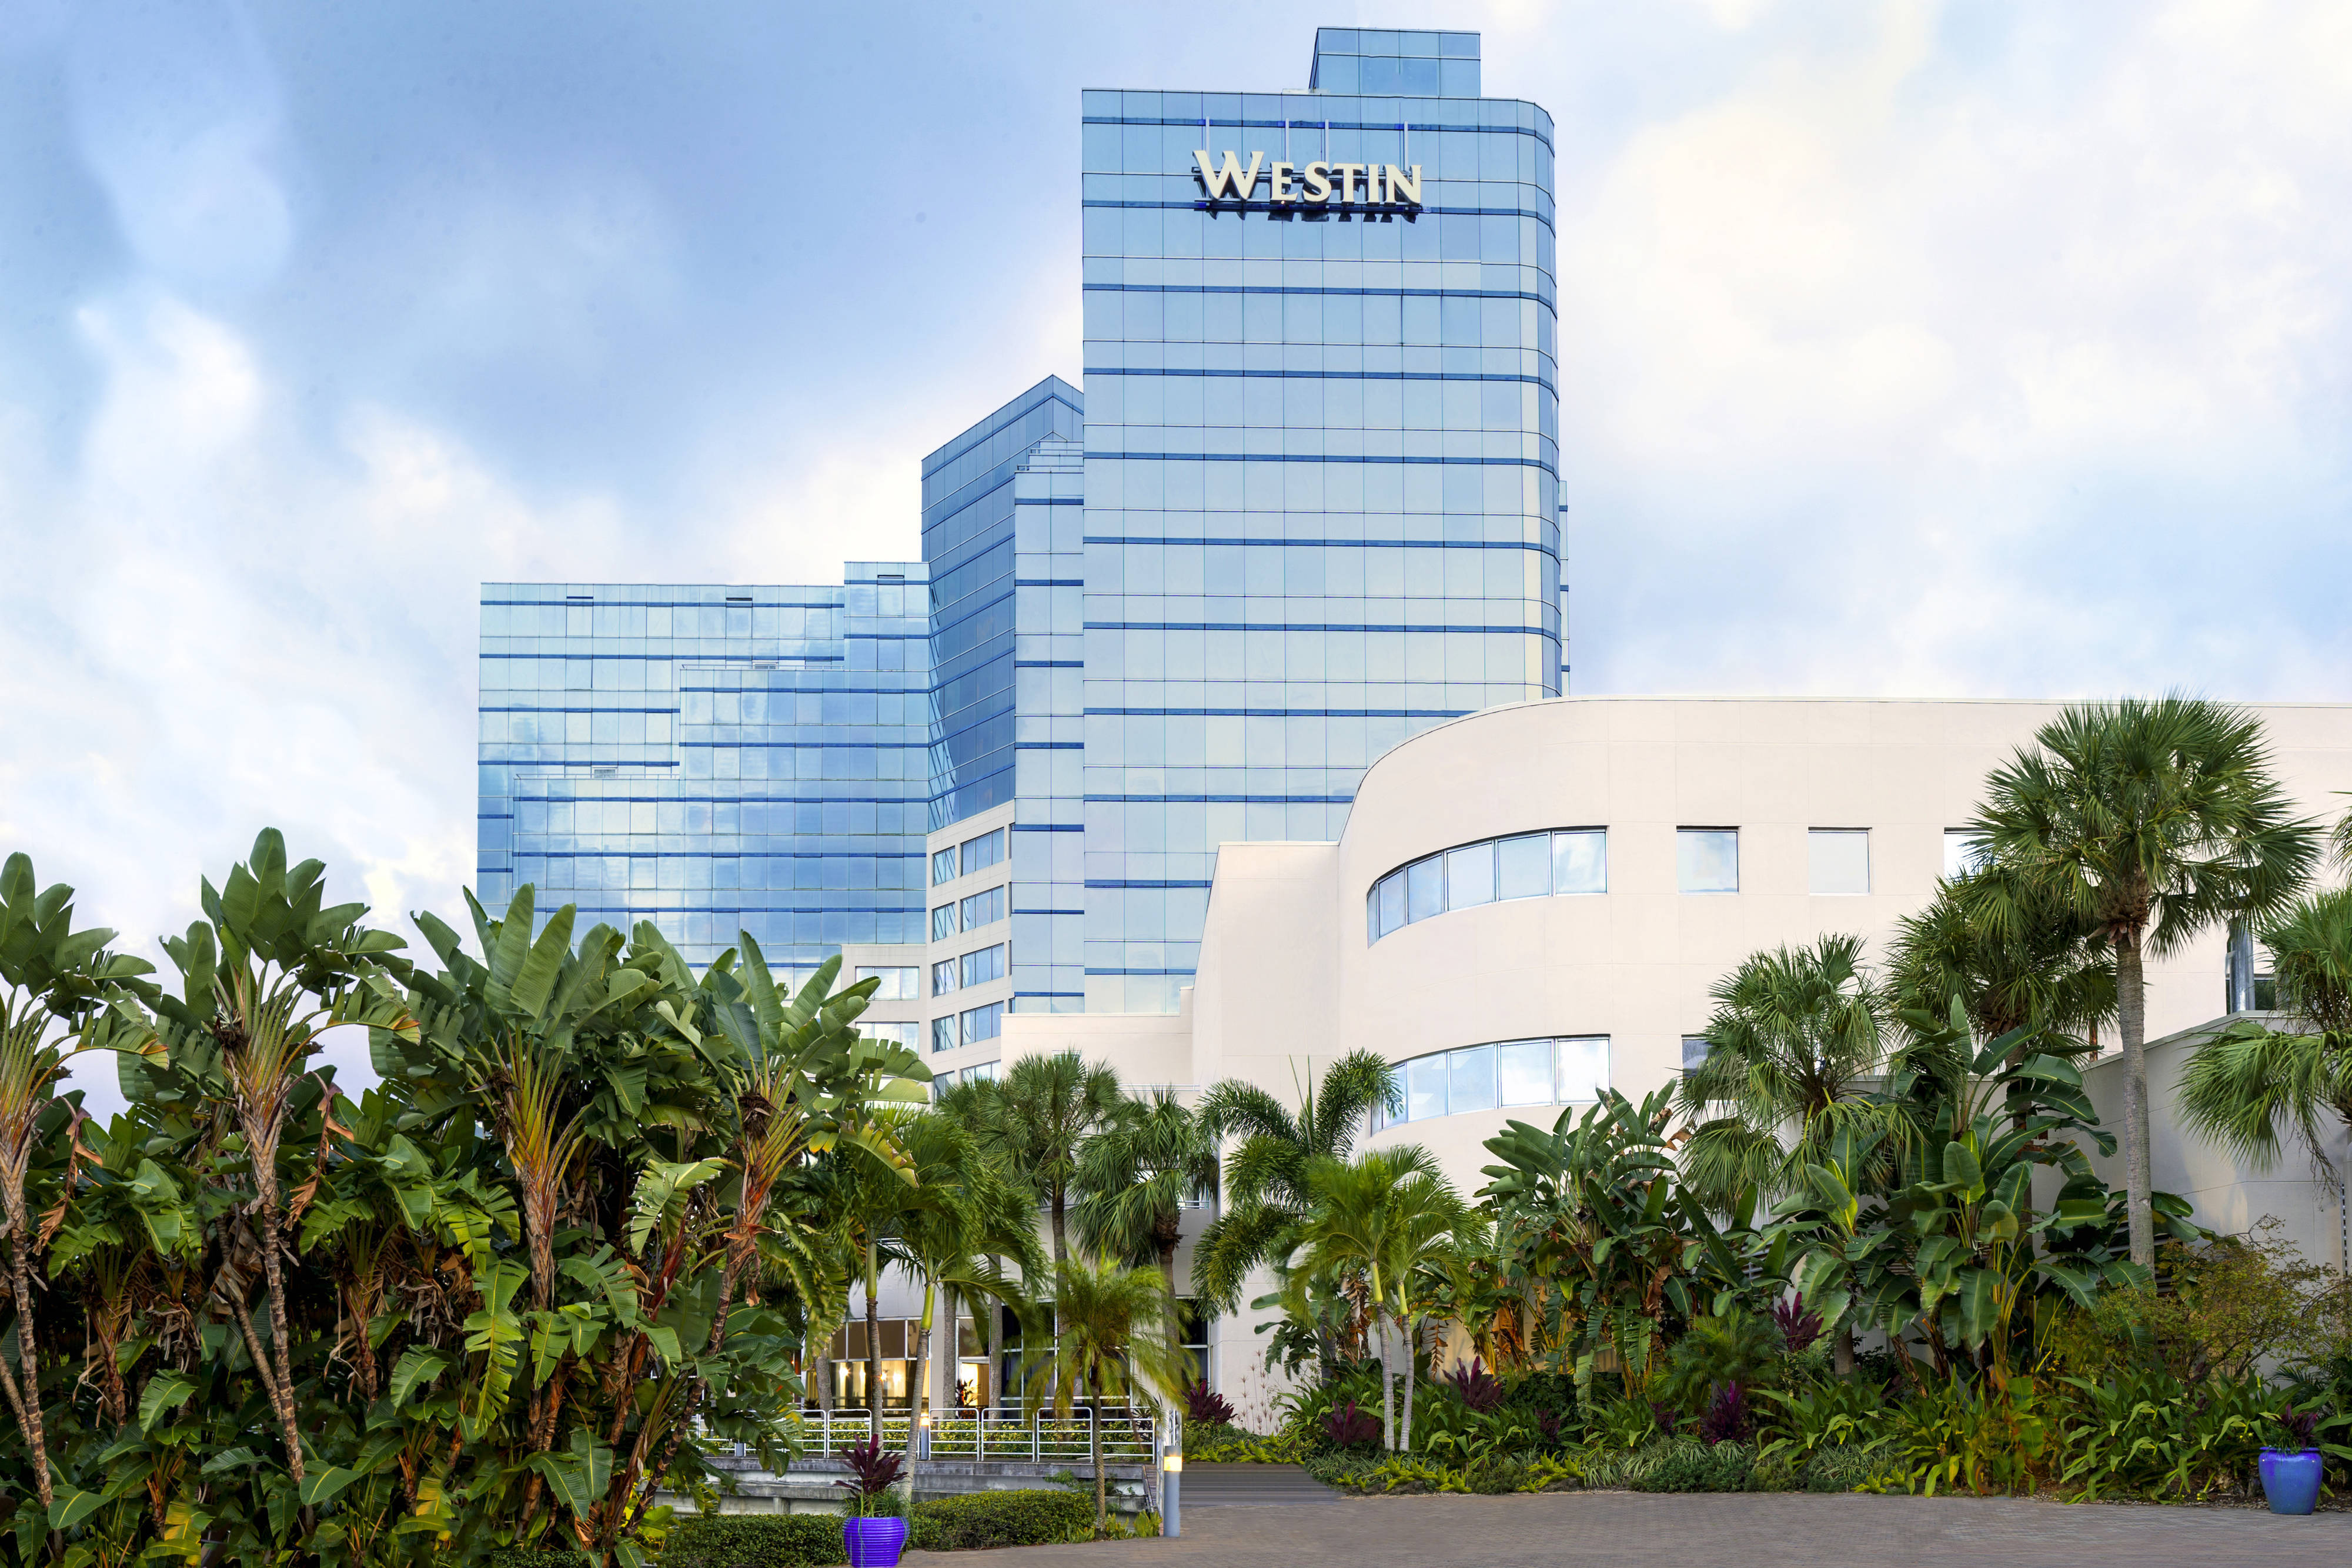 Photo of The Westin Fort Lauderdale, Fort Lauderdale, FL